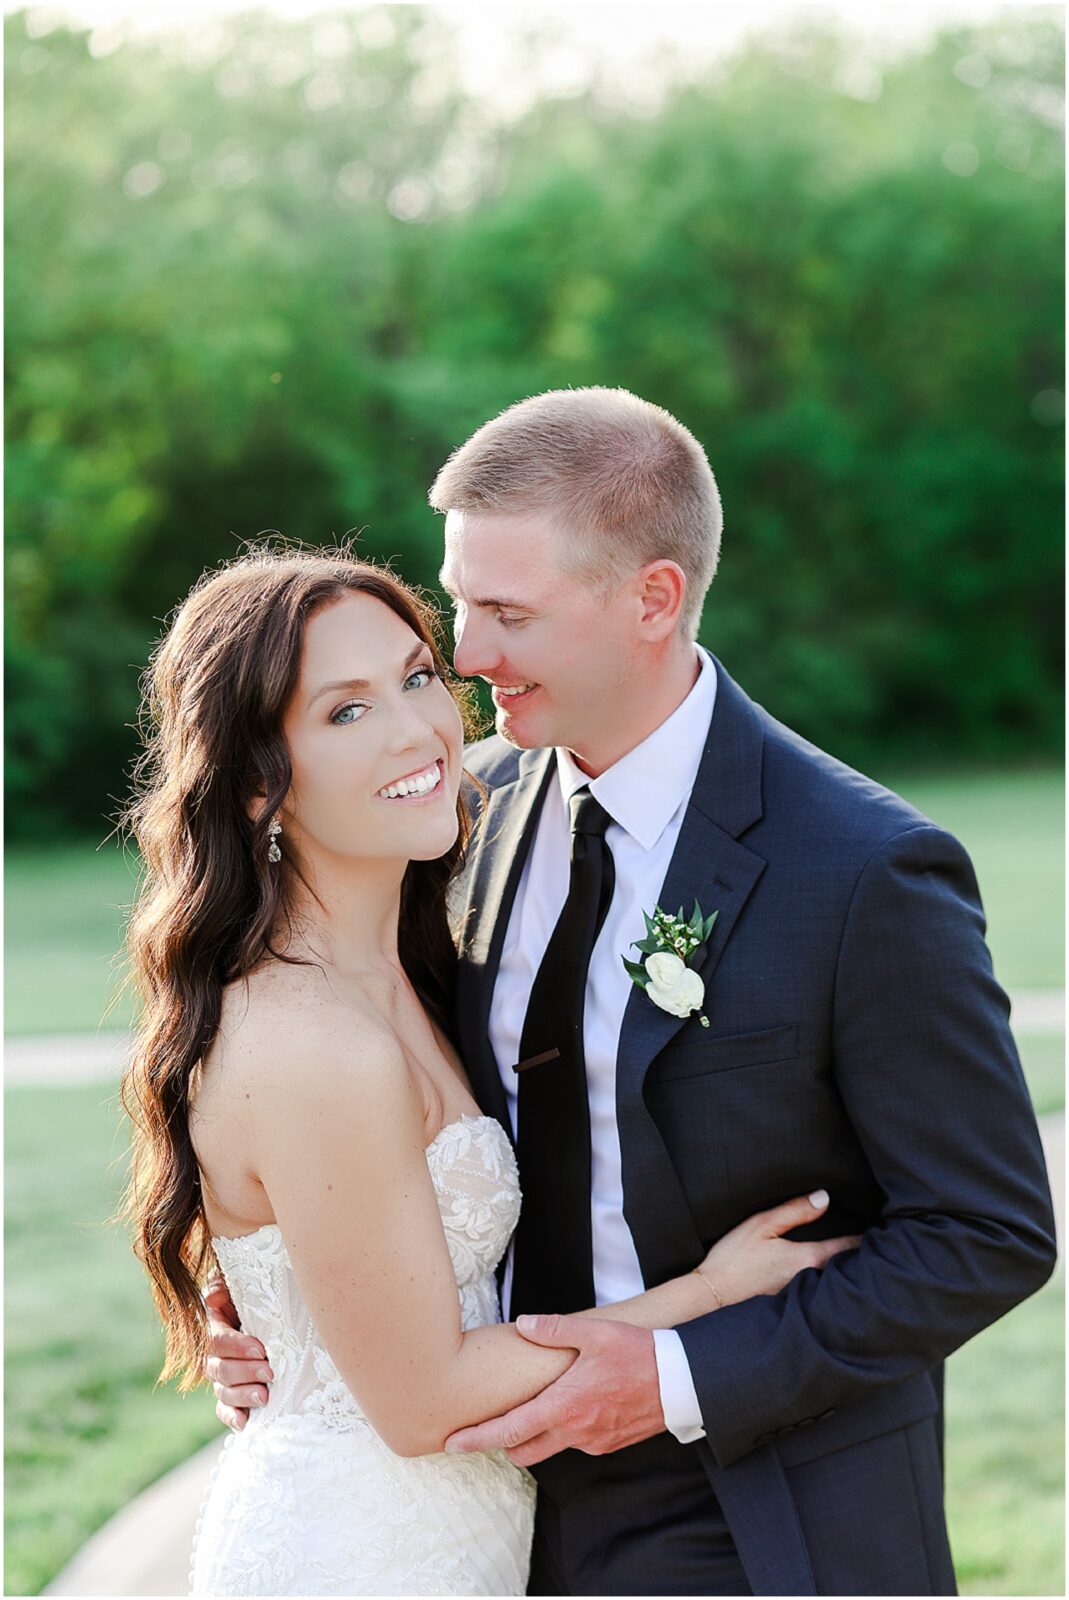 Sunset Photos | Beautiful Photo Ideas for Weddings | Outdoor Wedding Venue in Kansas City | Farms at Woodend Springs | KC Wedding Photography